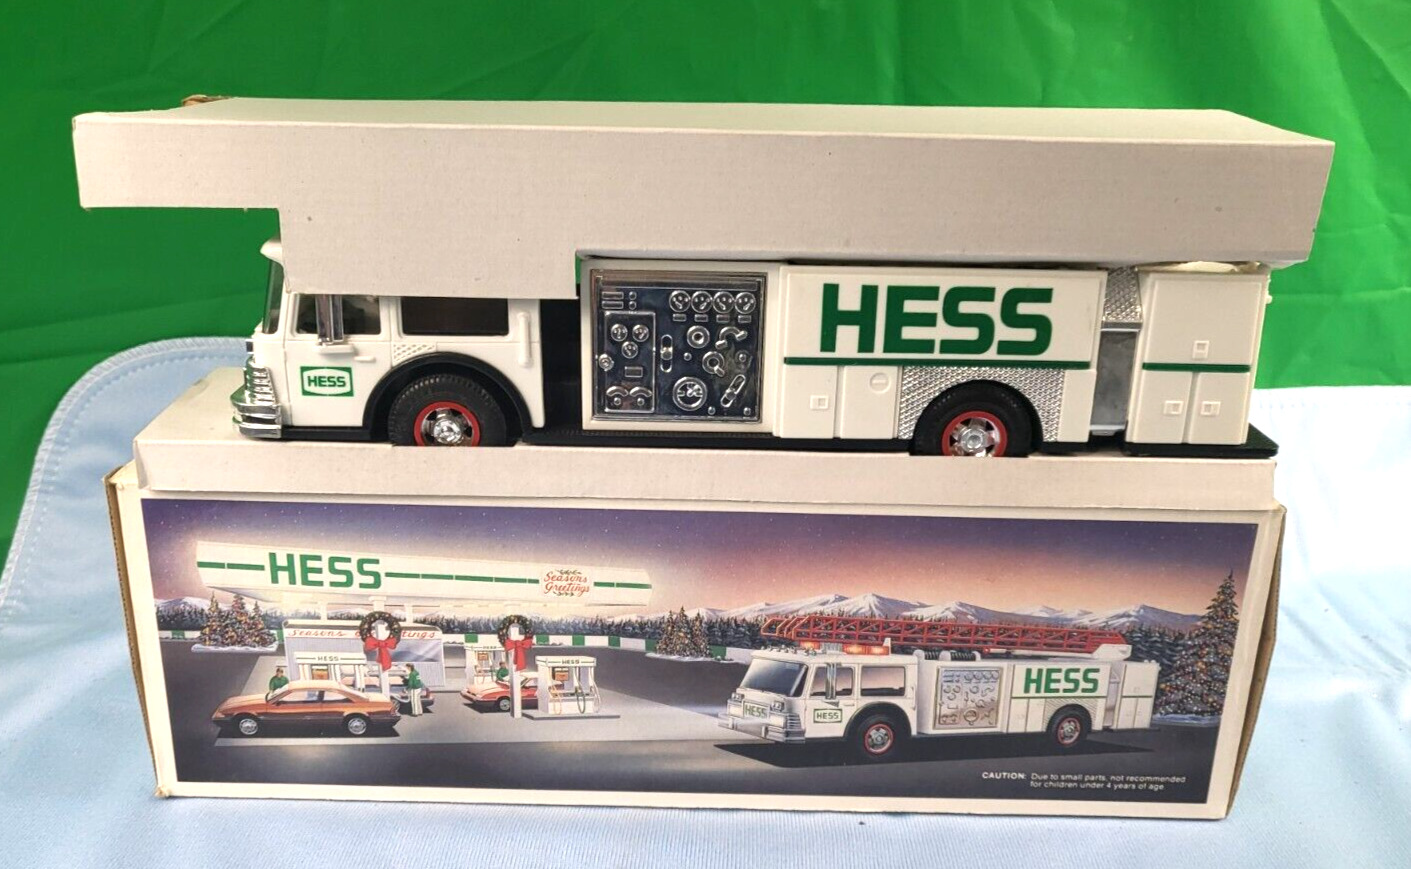 Vintage Hess 1989 Toy Fire Truck Bank i Lights & sound Working with Inserts